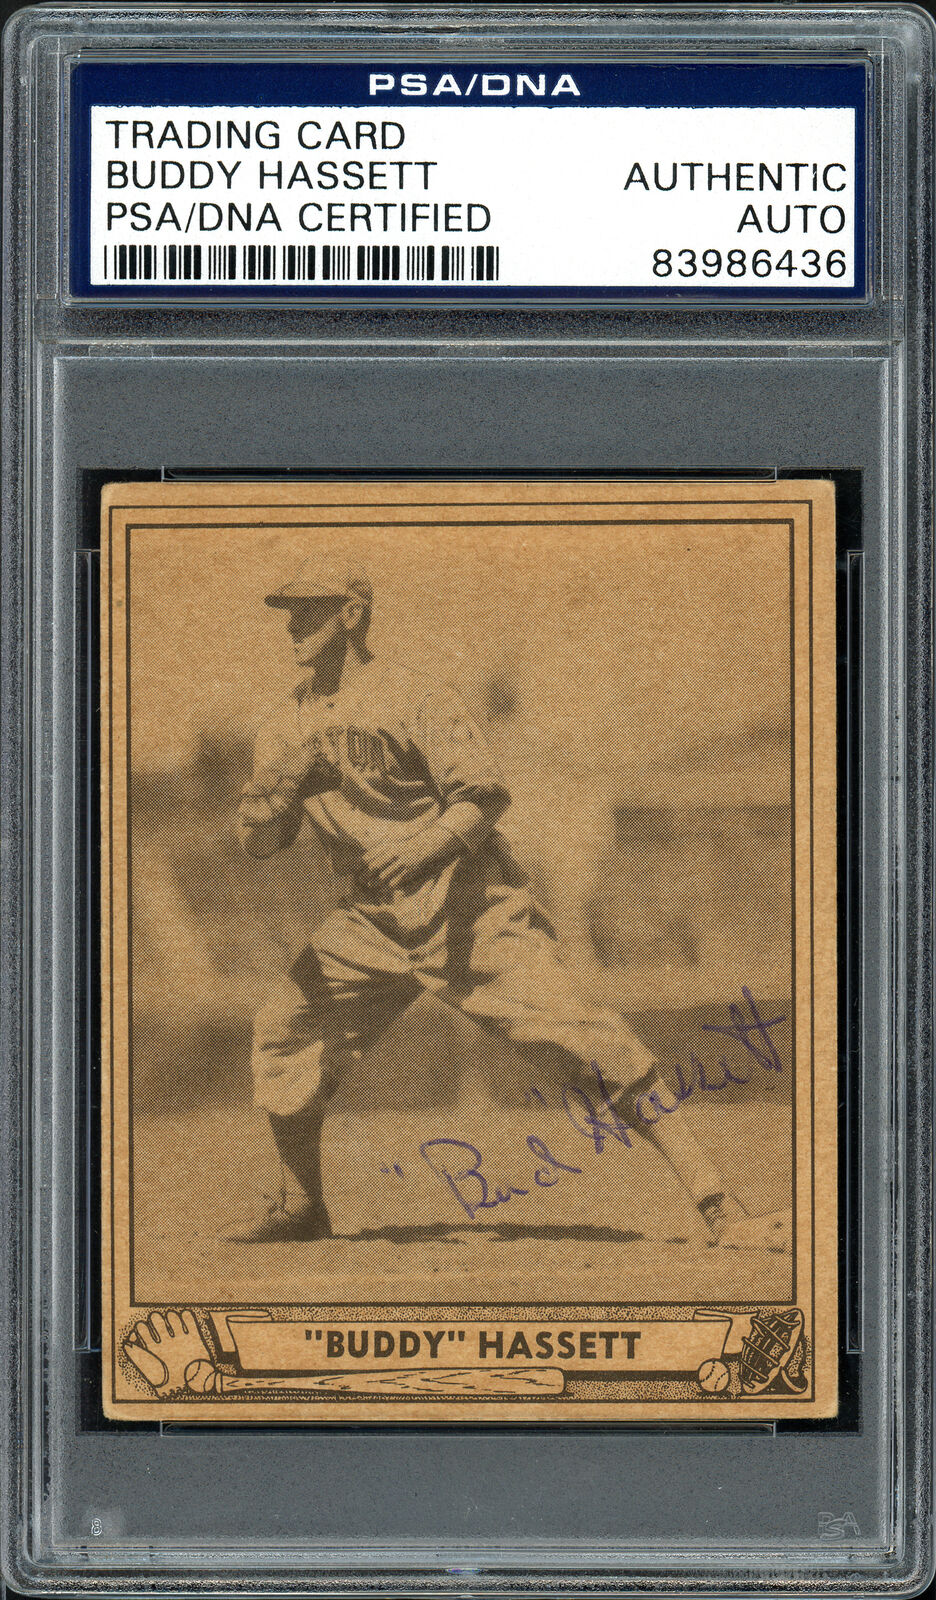 Buddy Hassett Autographed 1940 Play Ball Card #62 Boston Bees PSA/DNA 83986436 Image 2